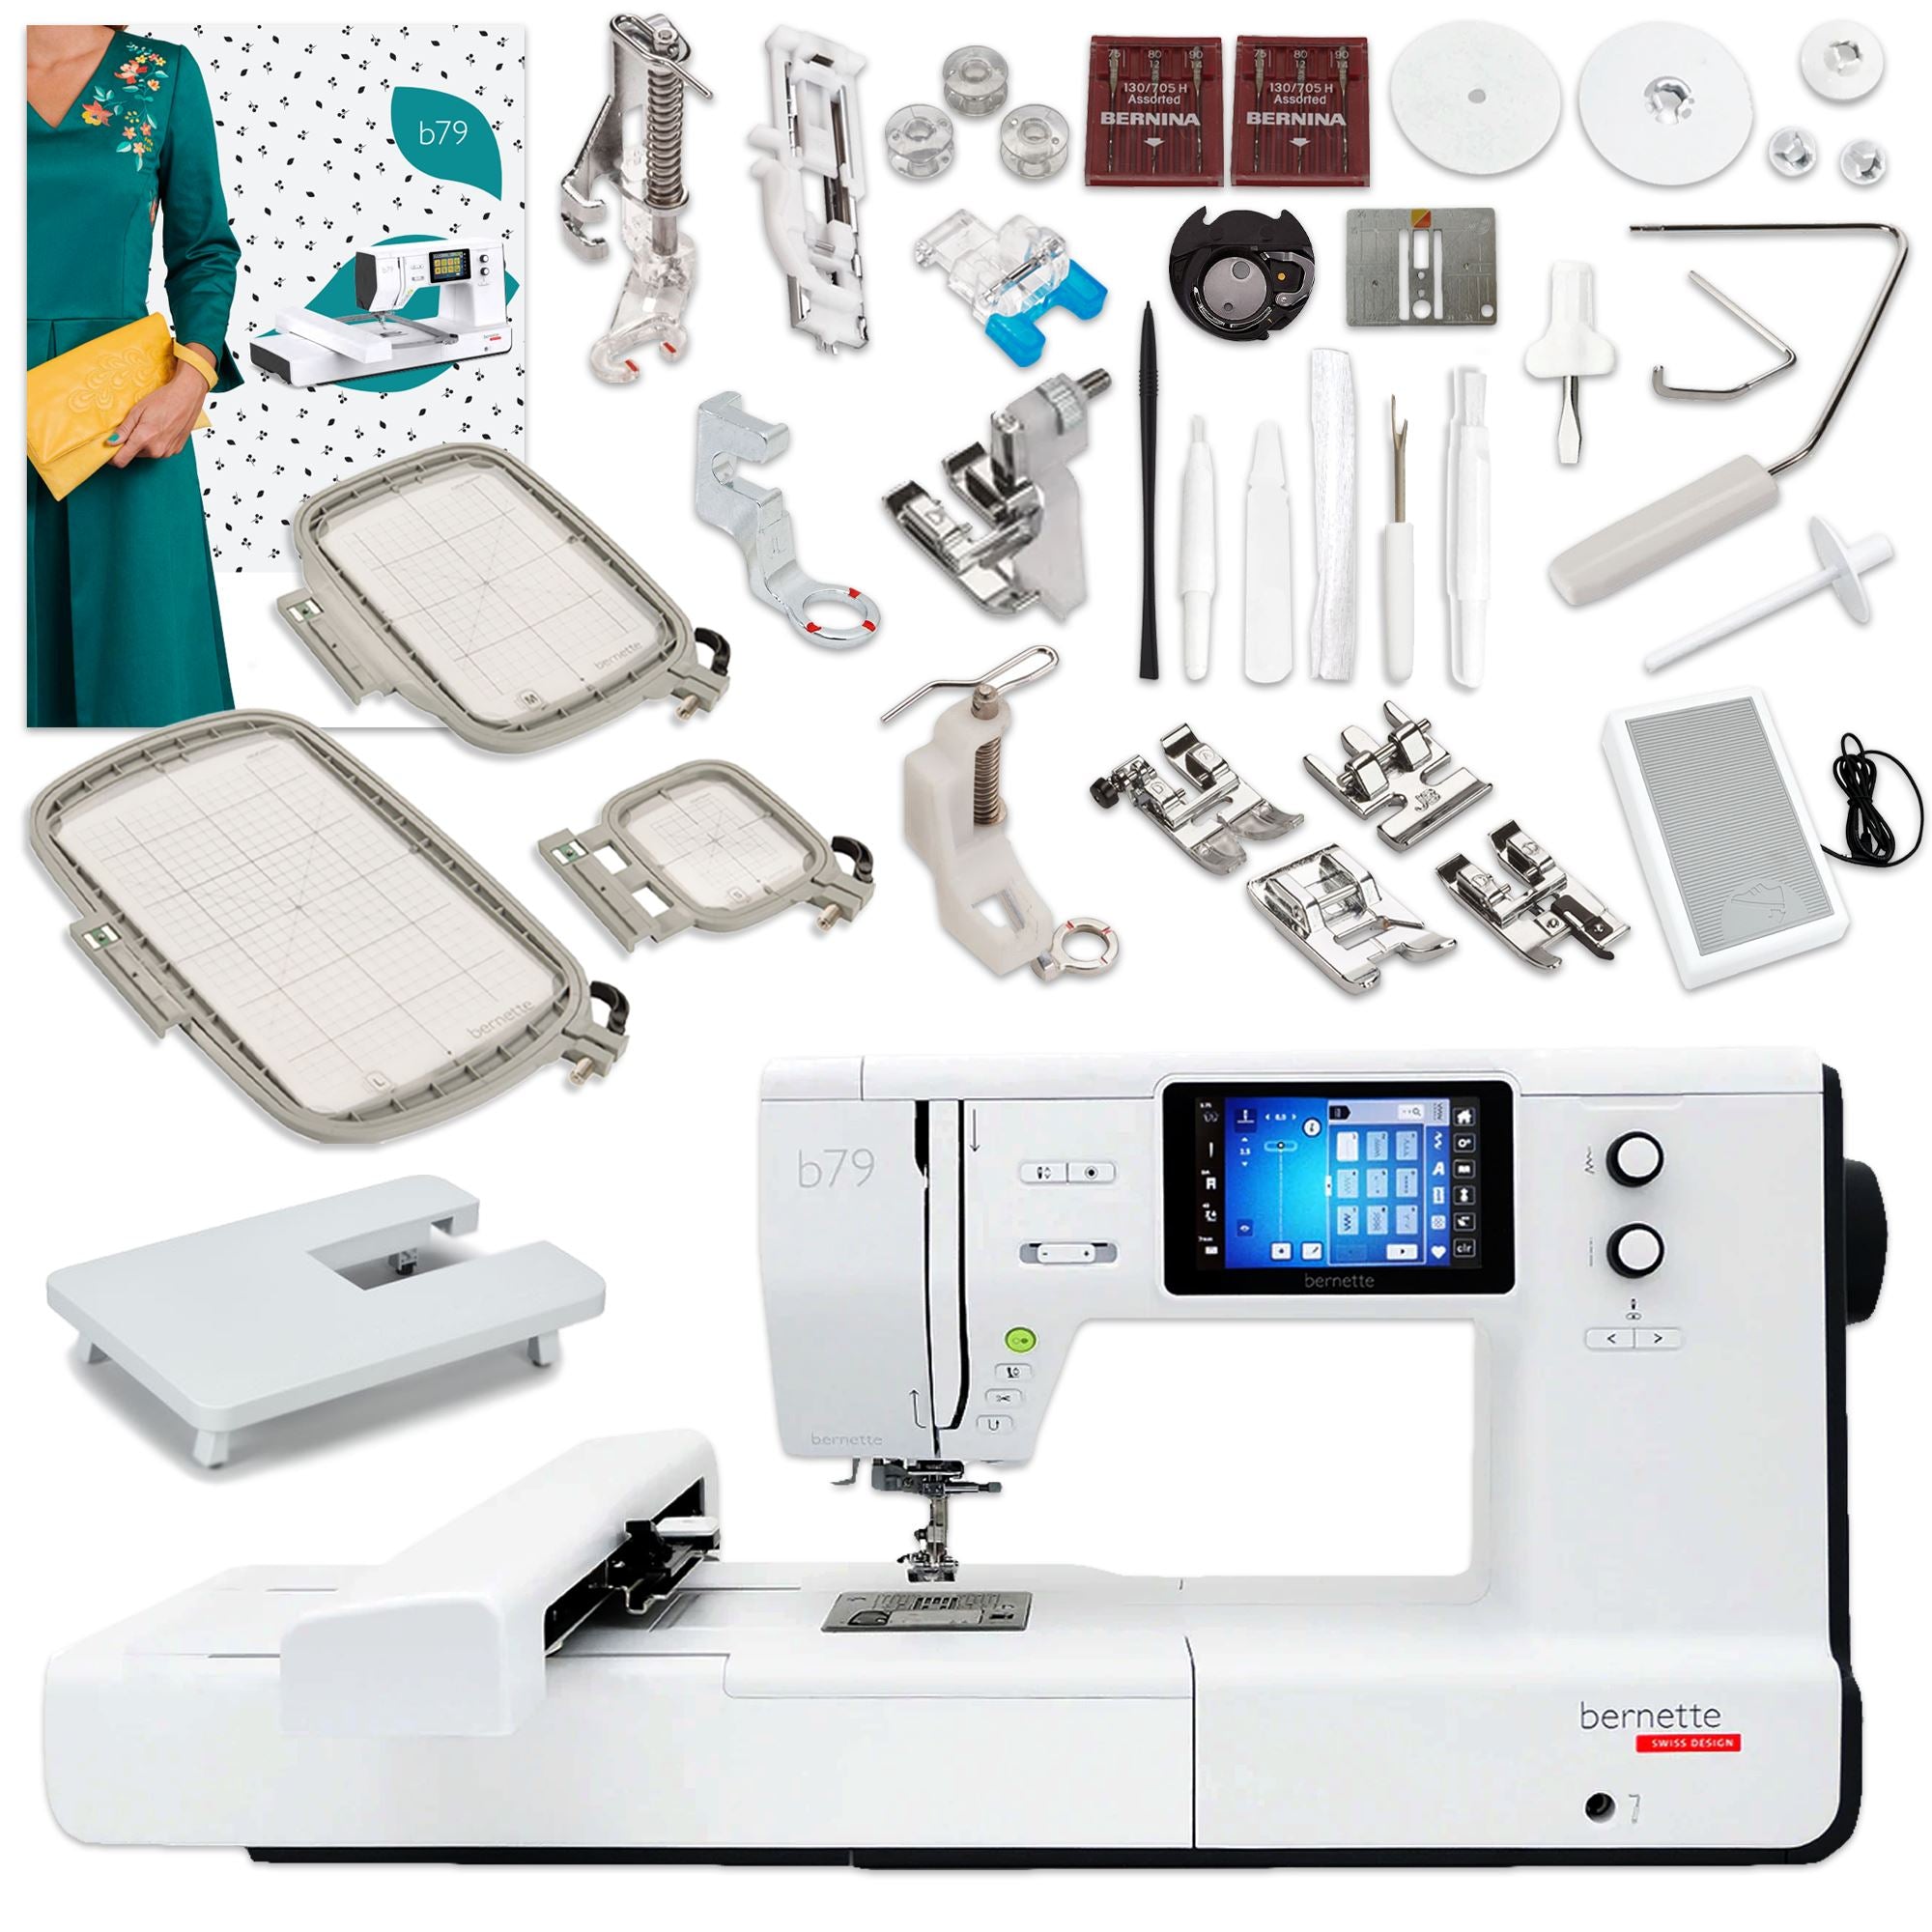 Bernette b79 Sewing and Embroidery Machine - Best Starter Embroidery Combo,  Includes Exclusive $500 Worth Tools and Accessories Bundle